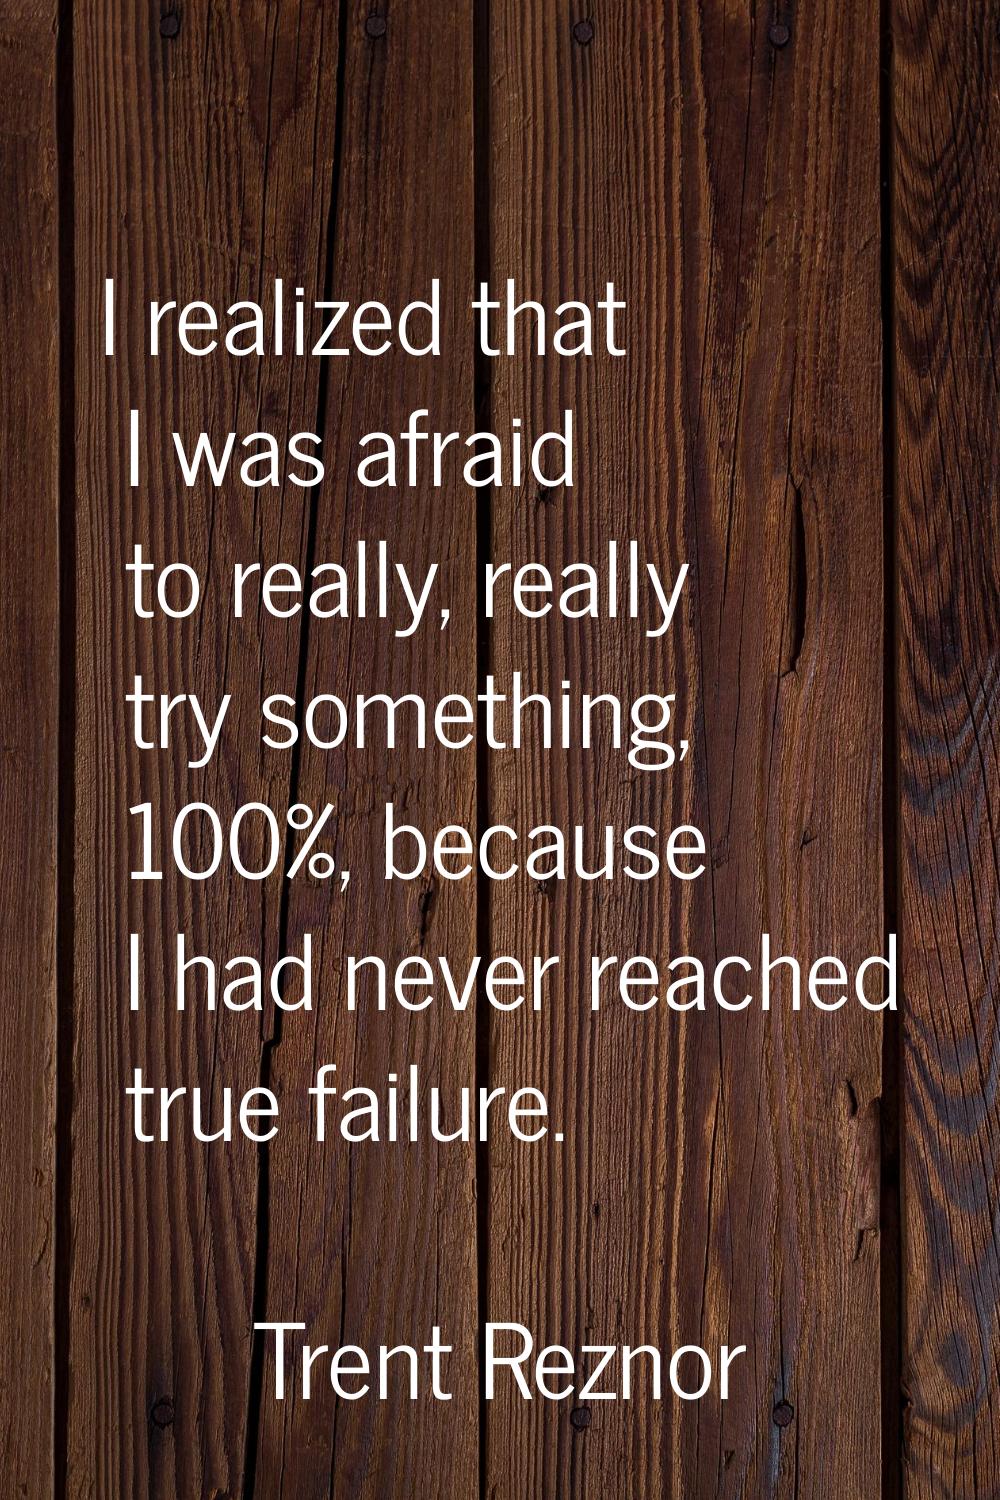 I realized that I was afraid to really, really try something, 100%, because I had never reached tru